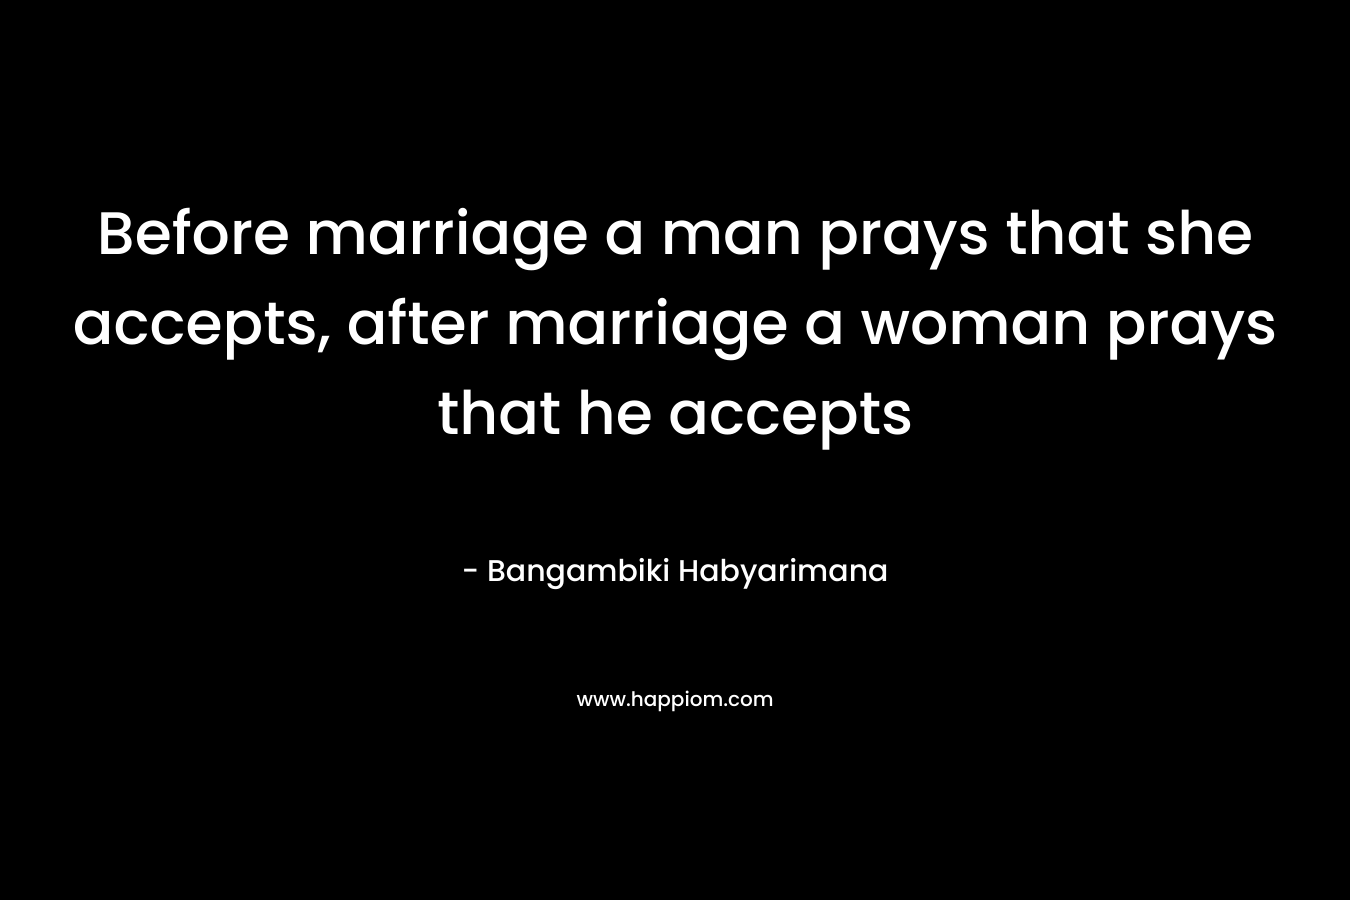 Before marriage a man prays that she accepts, after marriage a woman prays that he accepts